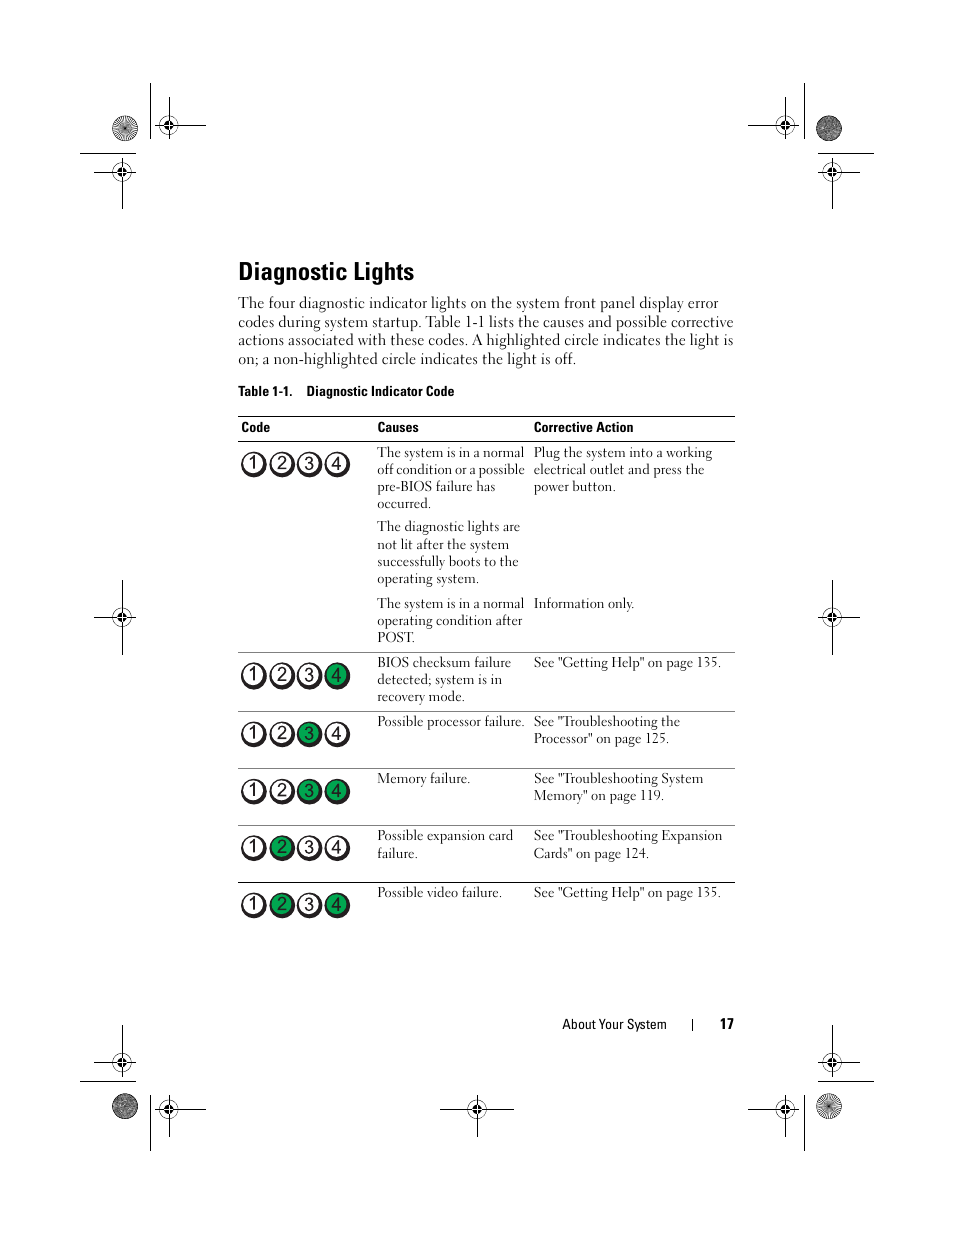 Diagnostic lights | Dell PowerEdge T110 II User Manual | Page 17 / 142